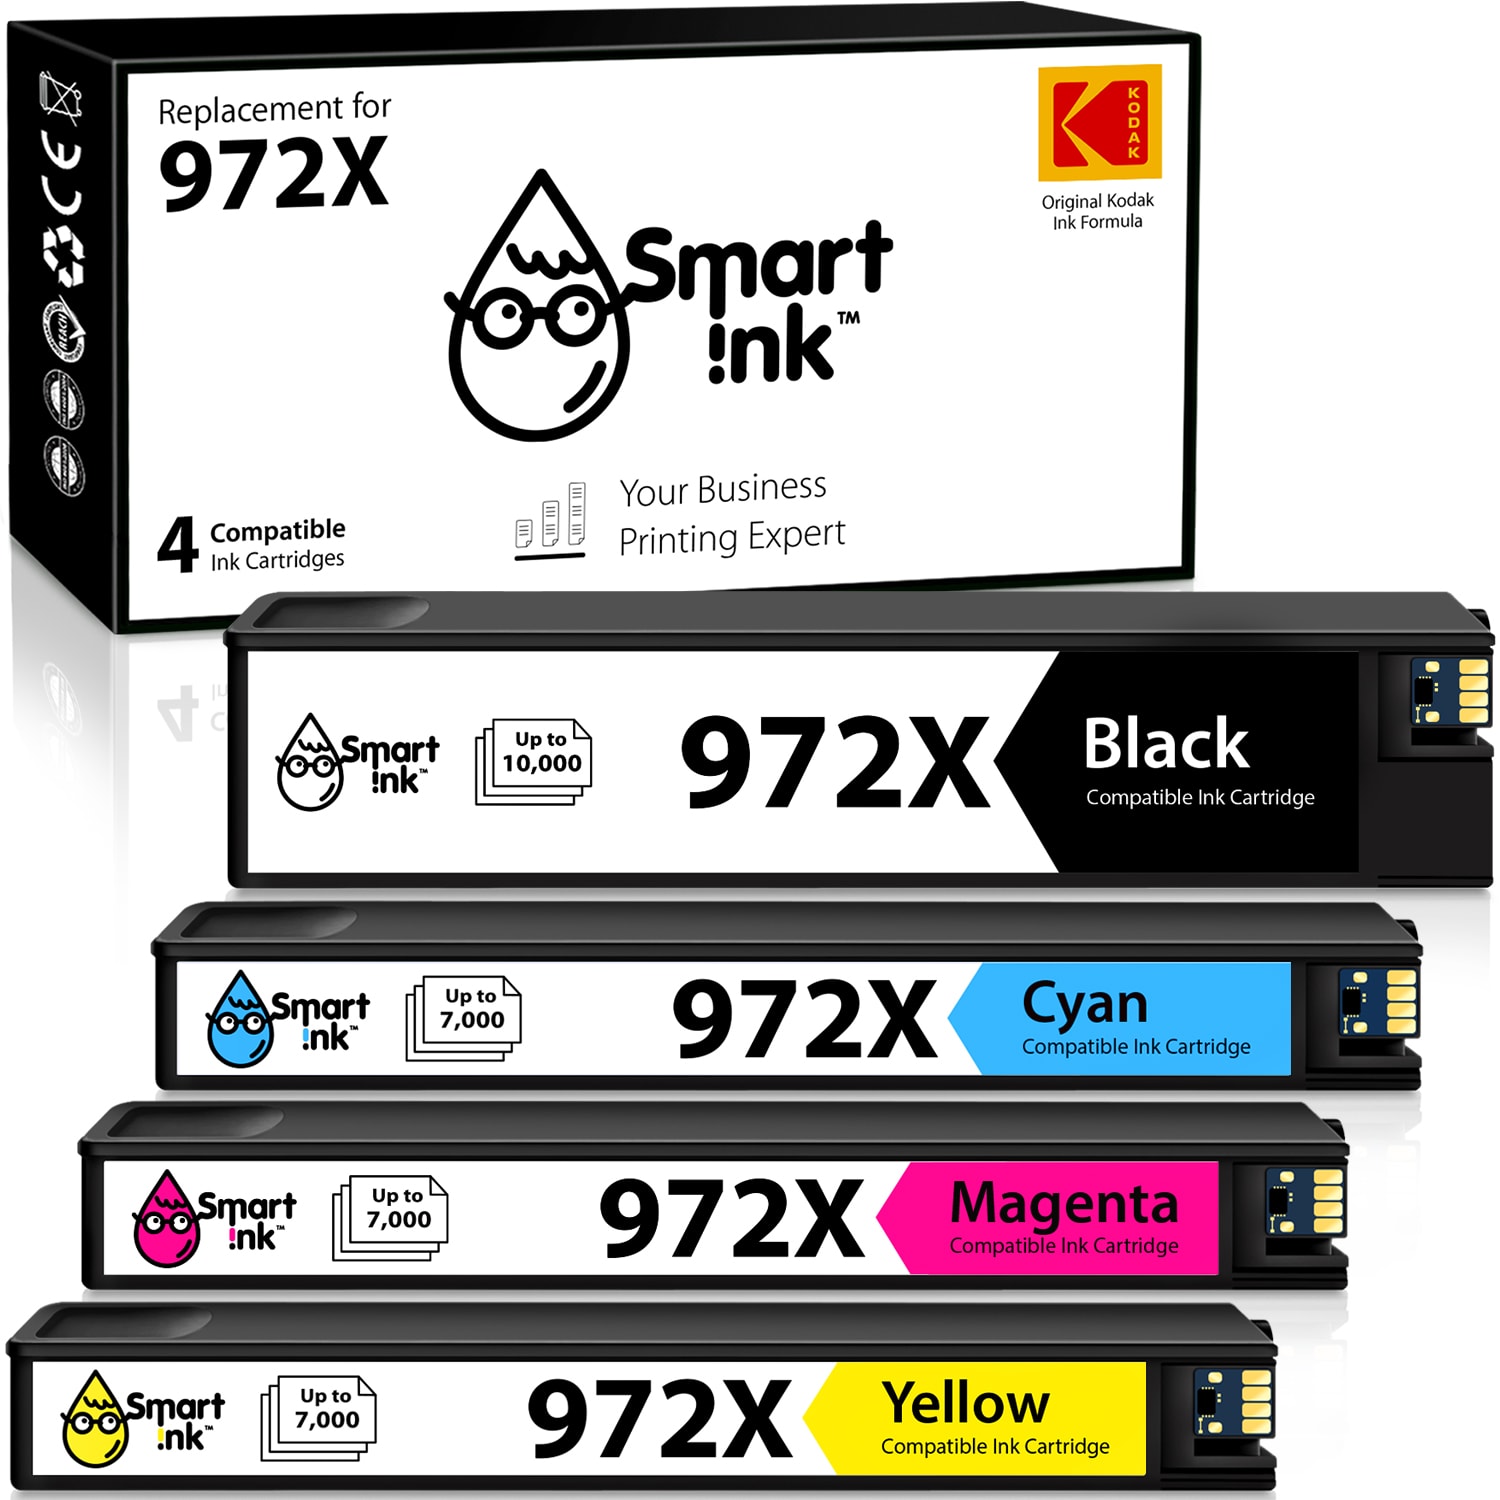 melodisk kant side HP PageWide Pro Multifunction 477dw ink cartridges - buy ink refills for HP  PageWide Pro Multifunction 477dw in USA